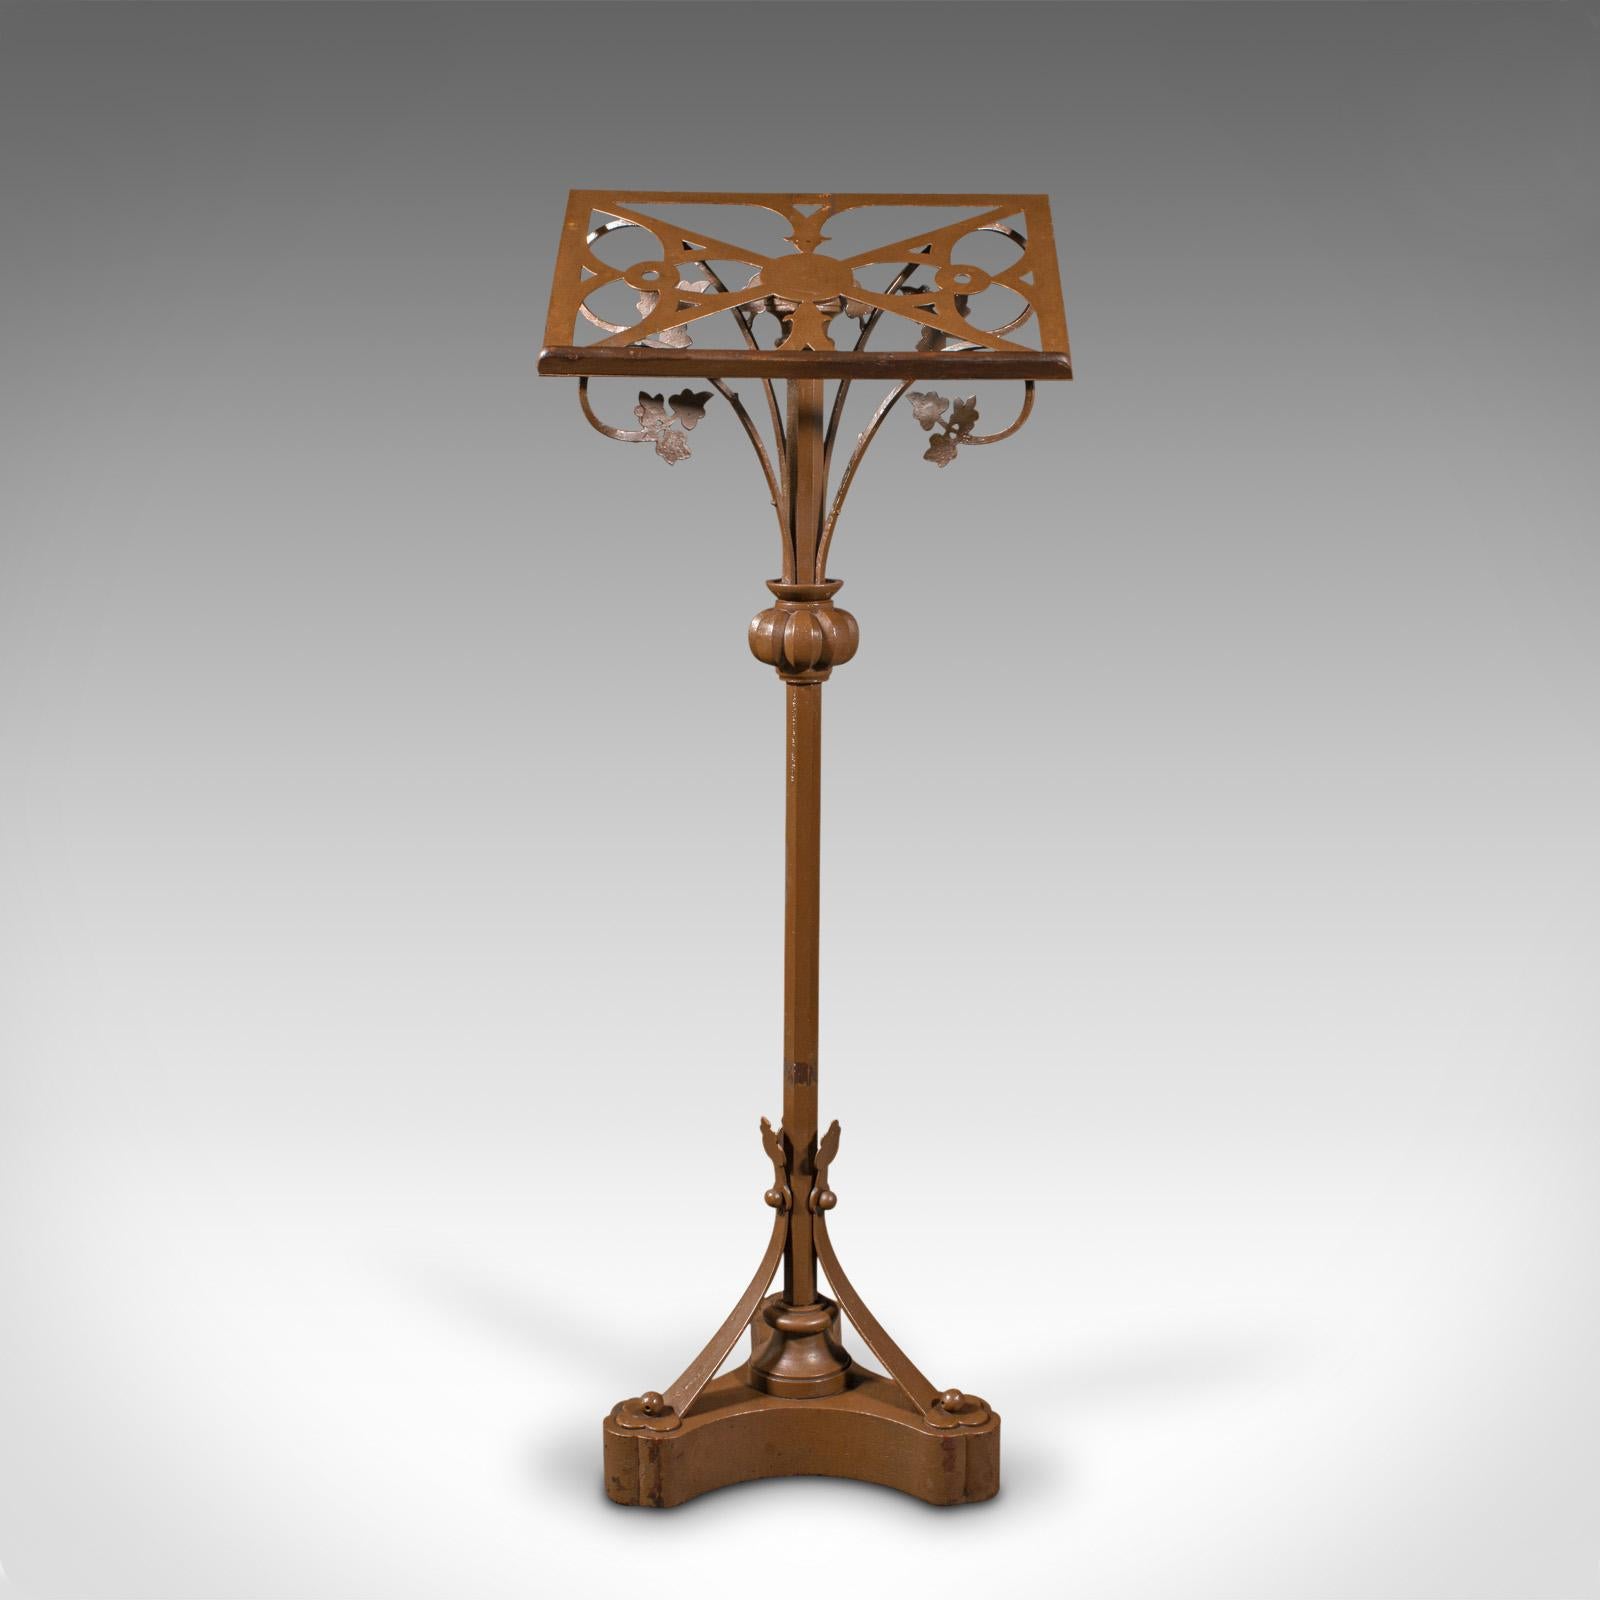 This is an antique maître d' stand. A Continental, wrought iron lectern or easel with Art Nouveau taste, dating to the late Victorian period, circa 1900.

Flourishes abound to this delightful Art Nouveau period stand
Displays a desirable aged